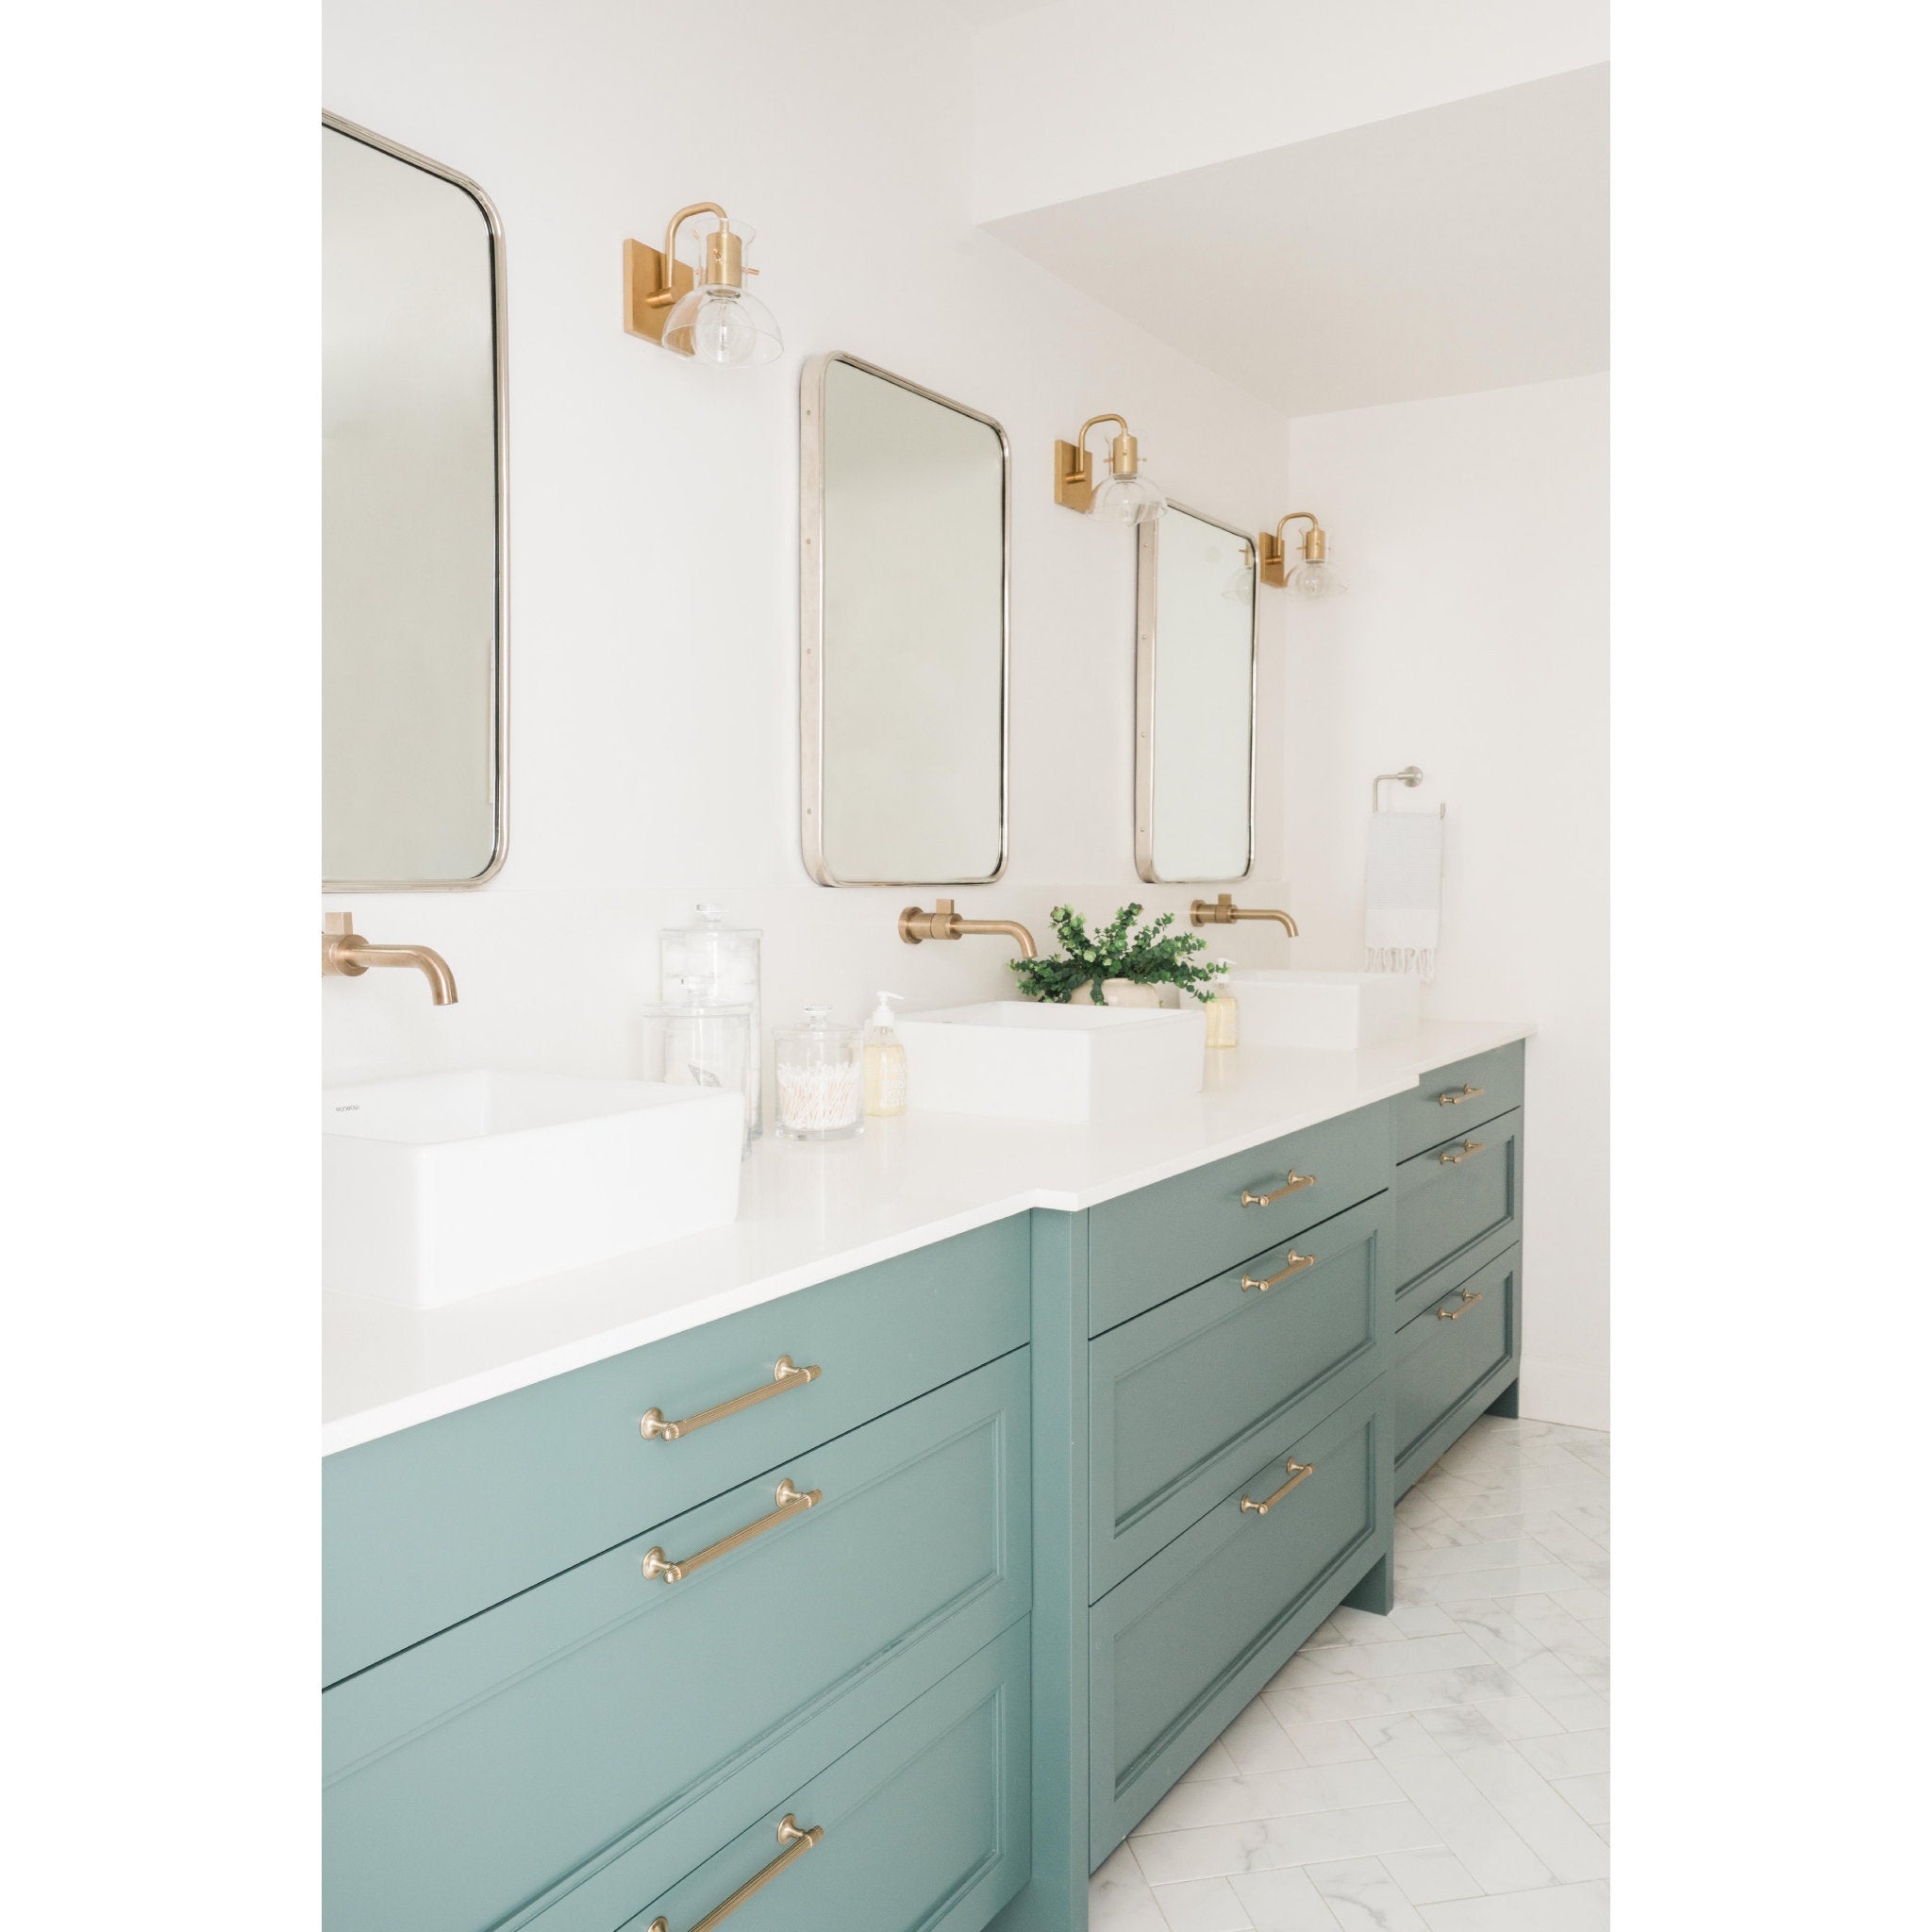 Riley 1-Light Bath and Vanity in Aged Brass